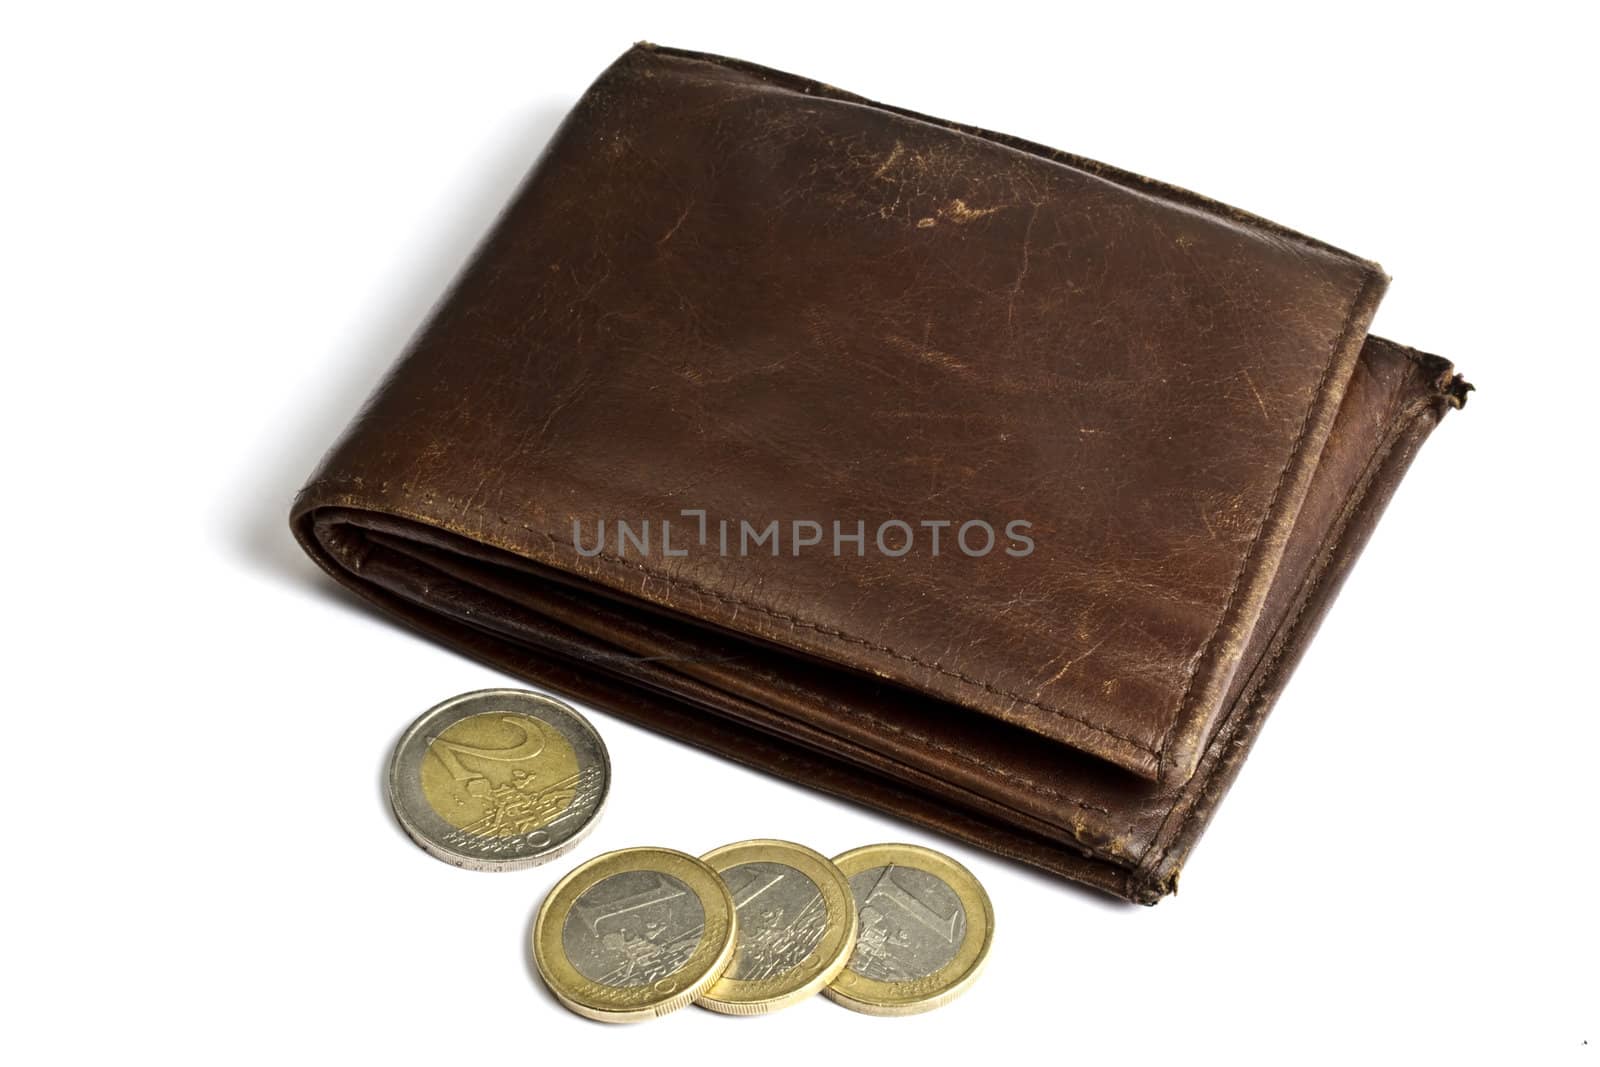 Brown wallet with coins isolated on white background